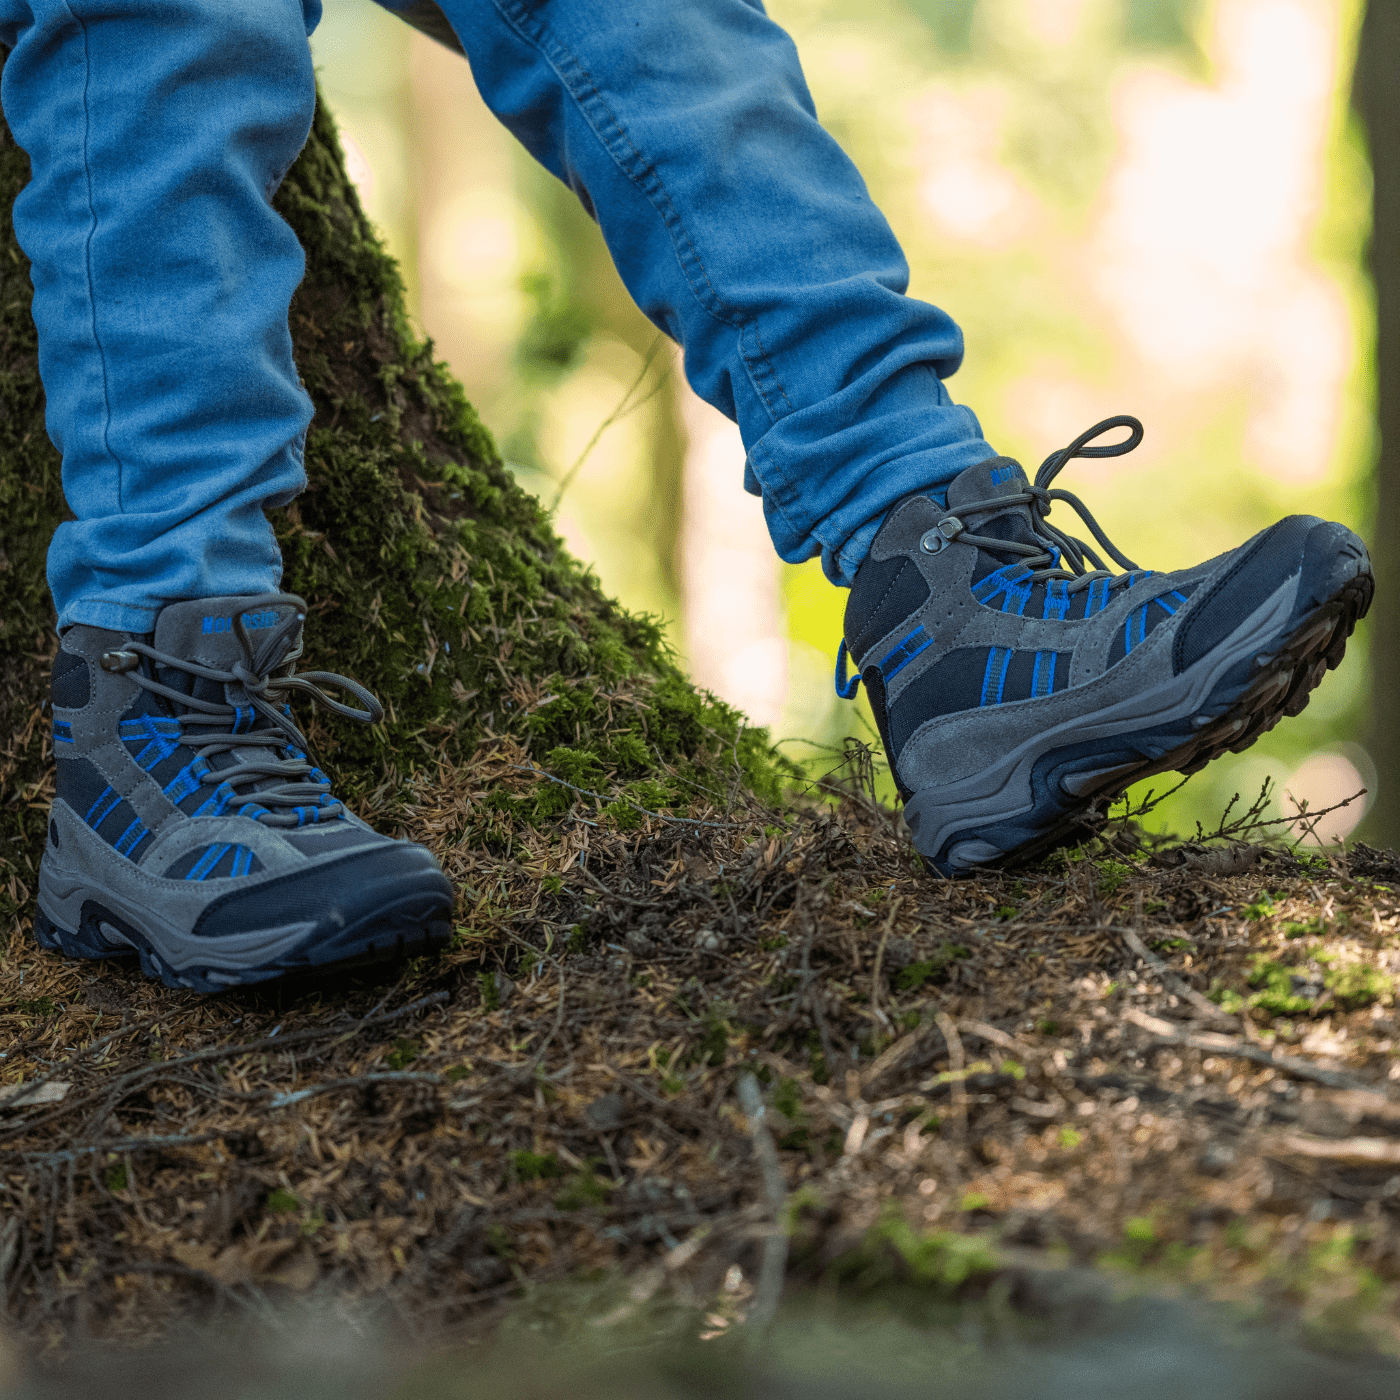 kid leaning on tree showing off his waterproof hiking boots for kids